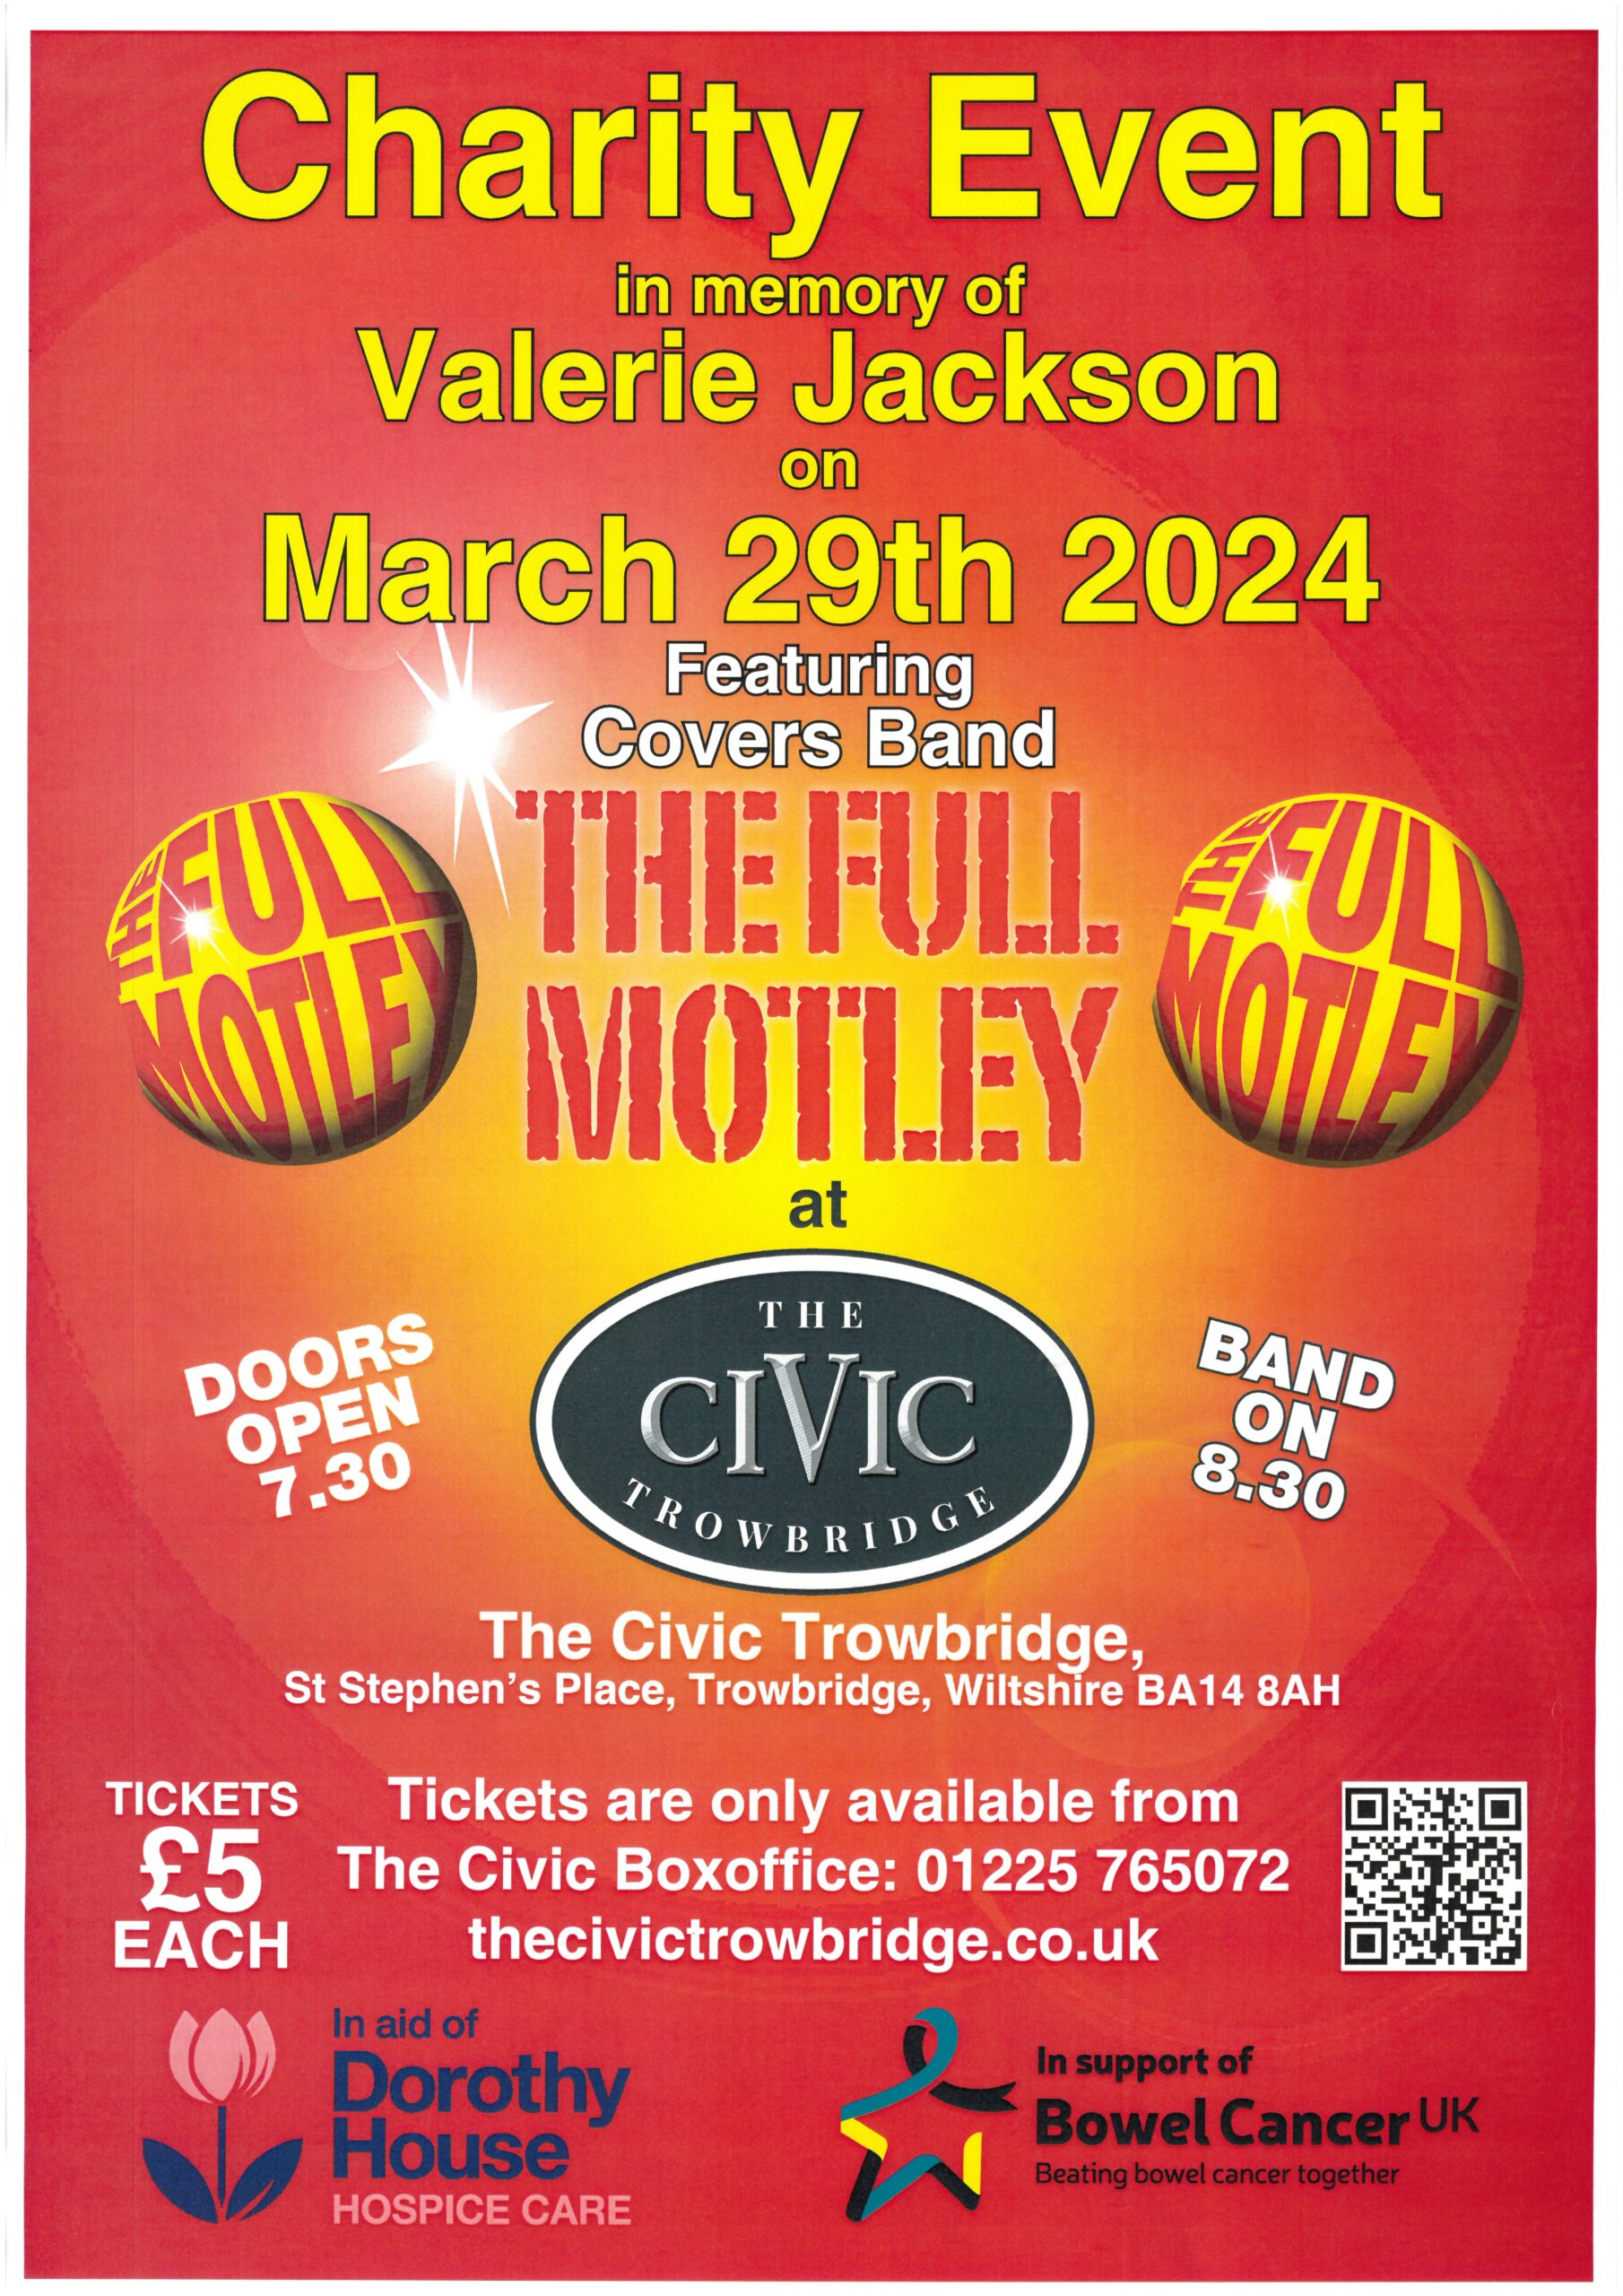 Charity Event in memory of Valerie Jackson